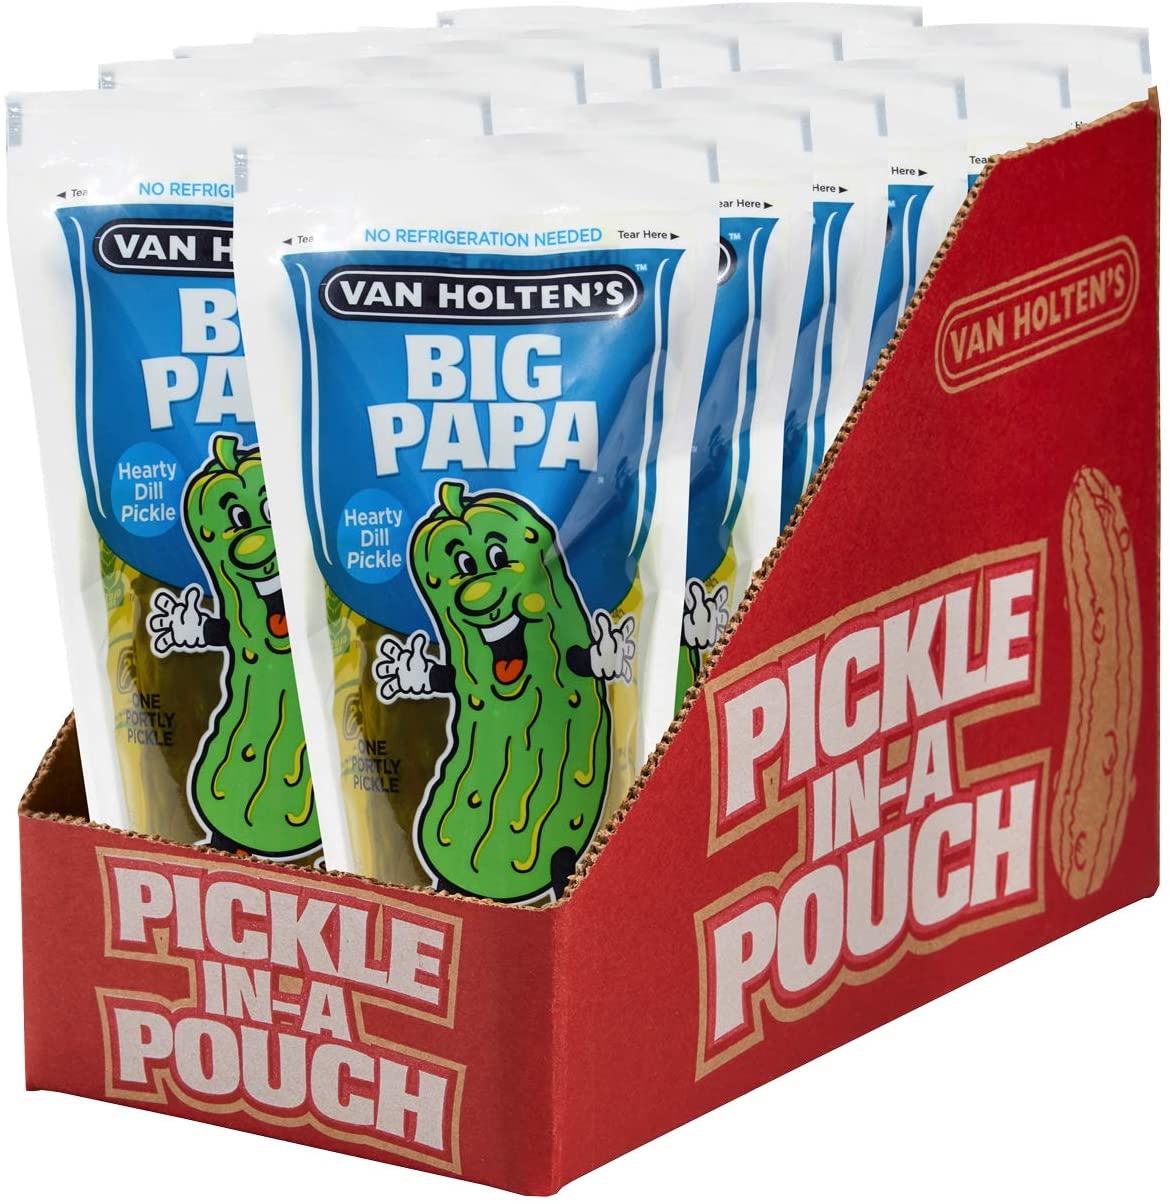 Van Holten - Pickle in-a Pouch - Big Papa